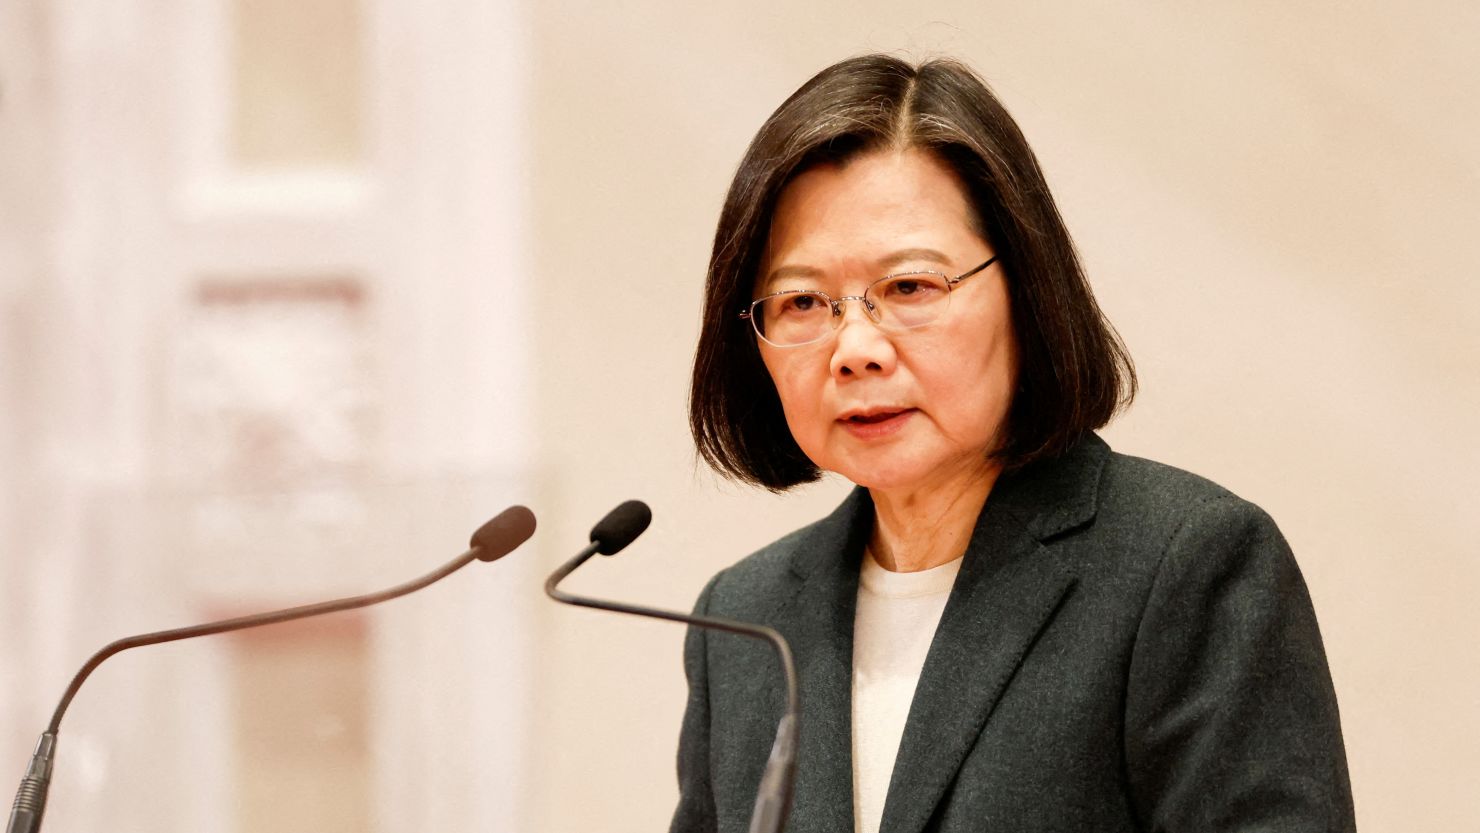 Tsai's trip will be from March 29 to April 7. This is not the first time she will transit the US to visit diplomatic allies. 